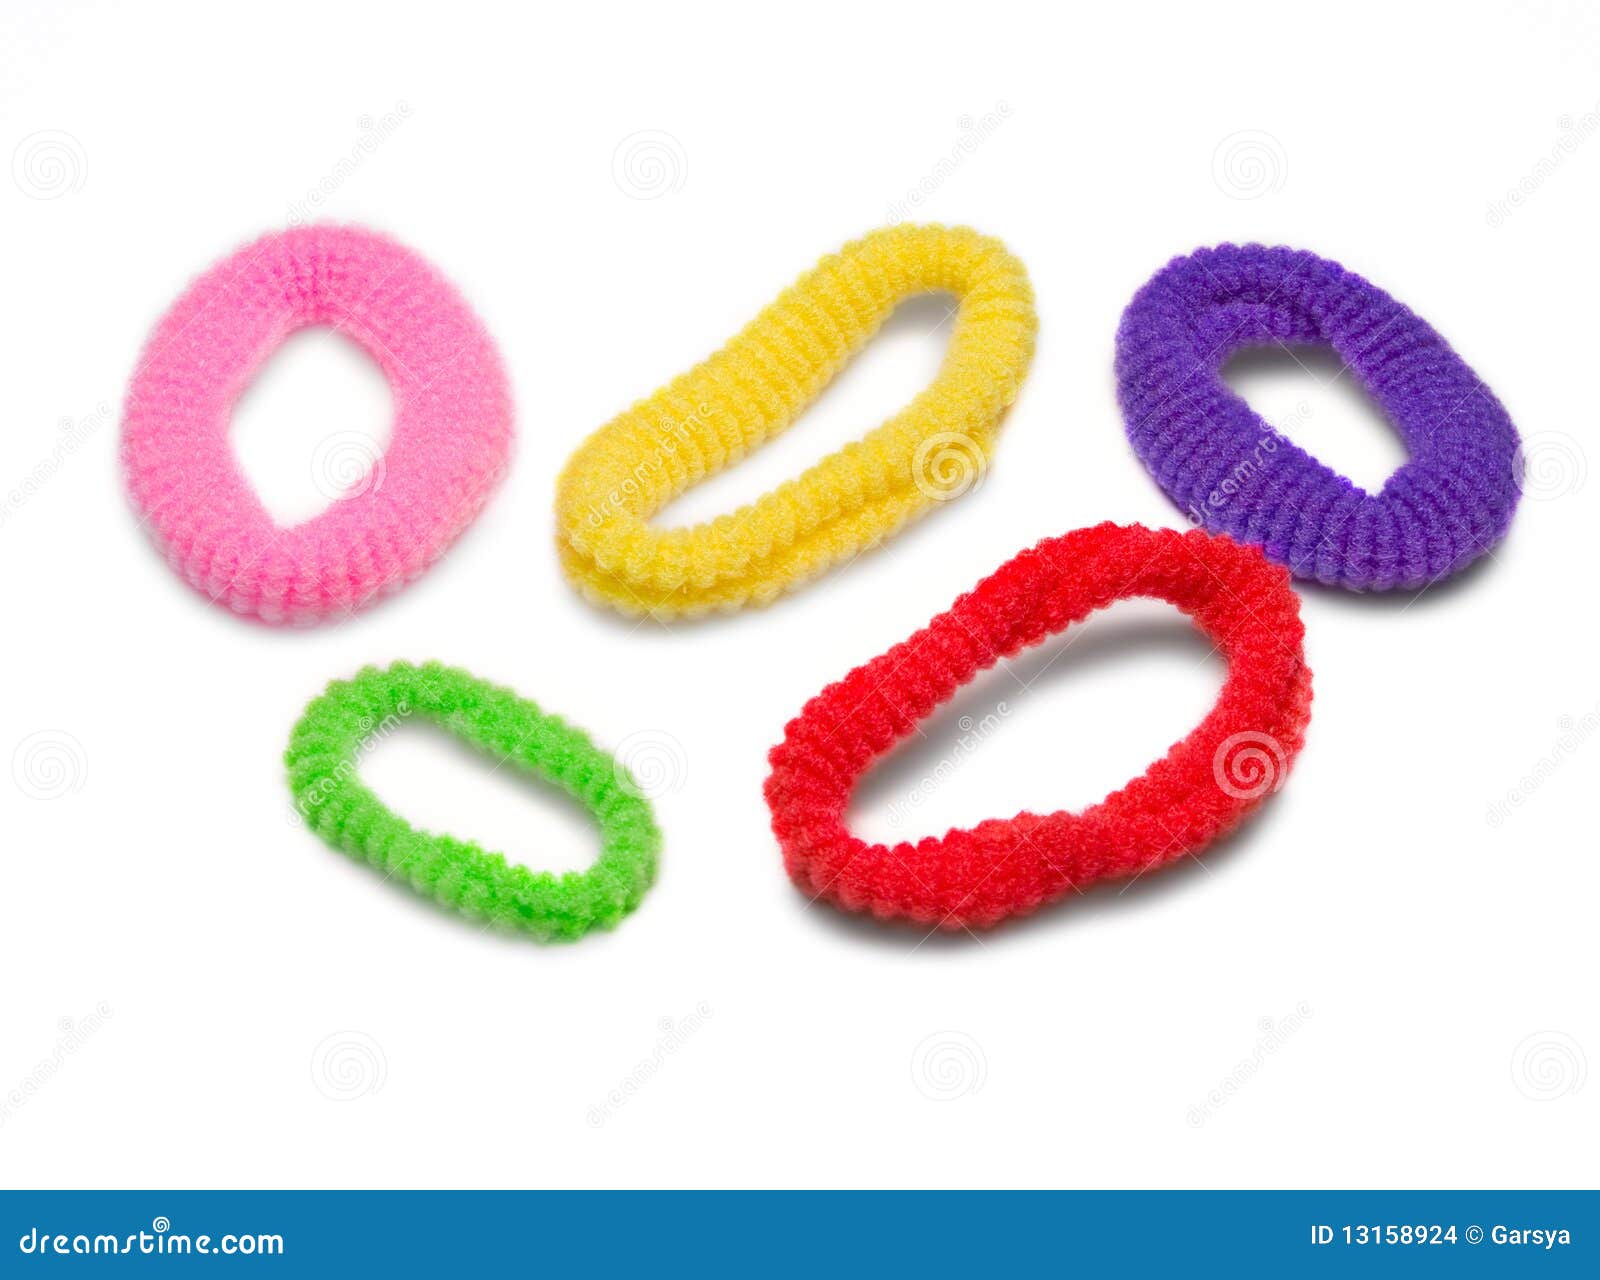 Hair Elastic Bands Stock Images Image 13158924